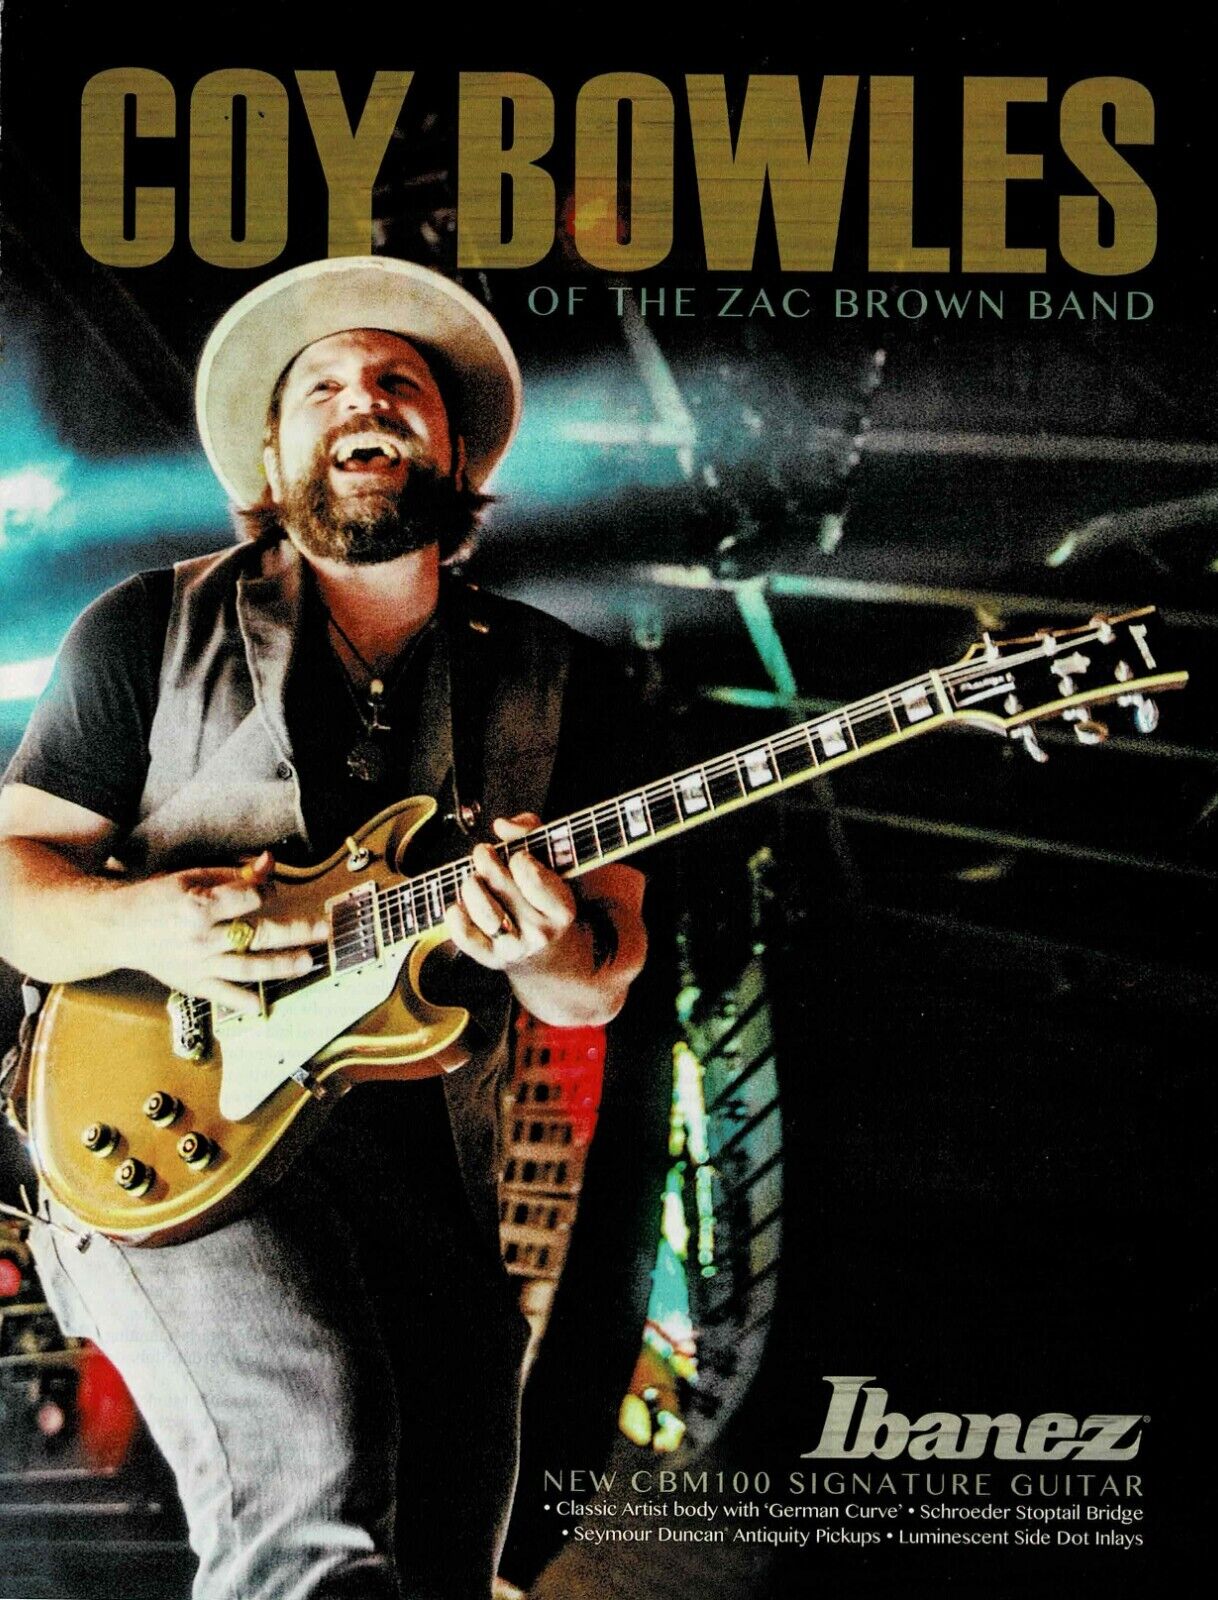 Coy Bowles of The Zac Brown Band - Ibanez Guitars - 2016 Print Ad